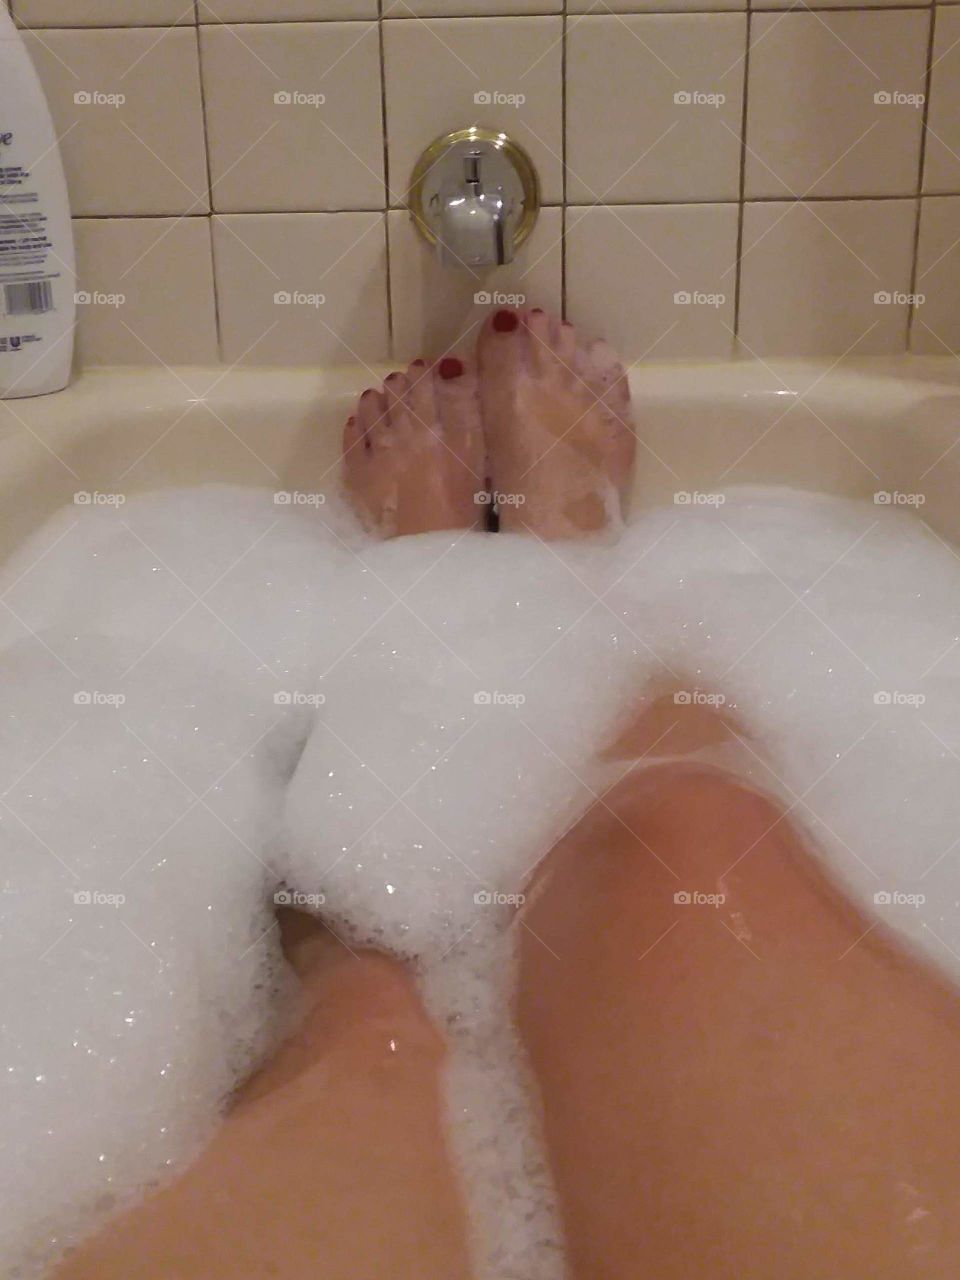 Just a girl in her bubble bath